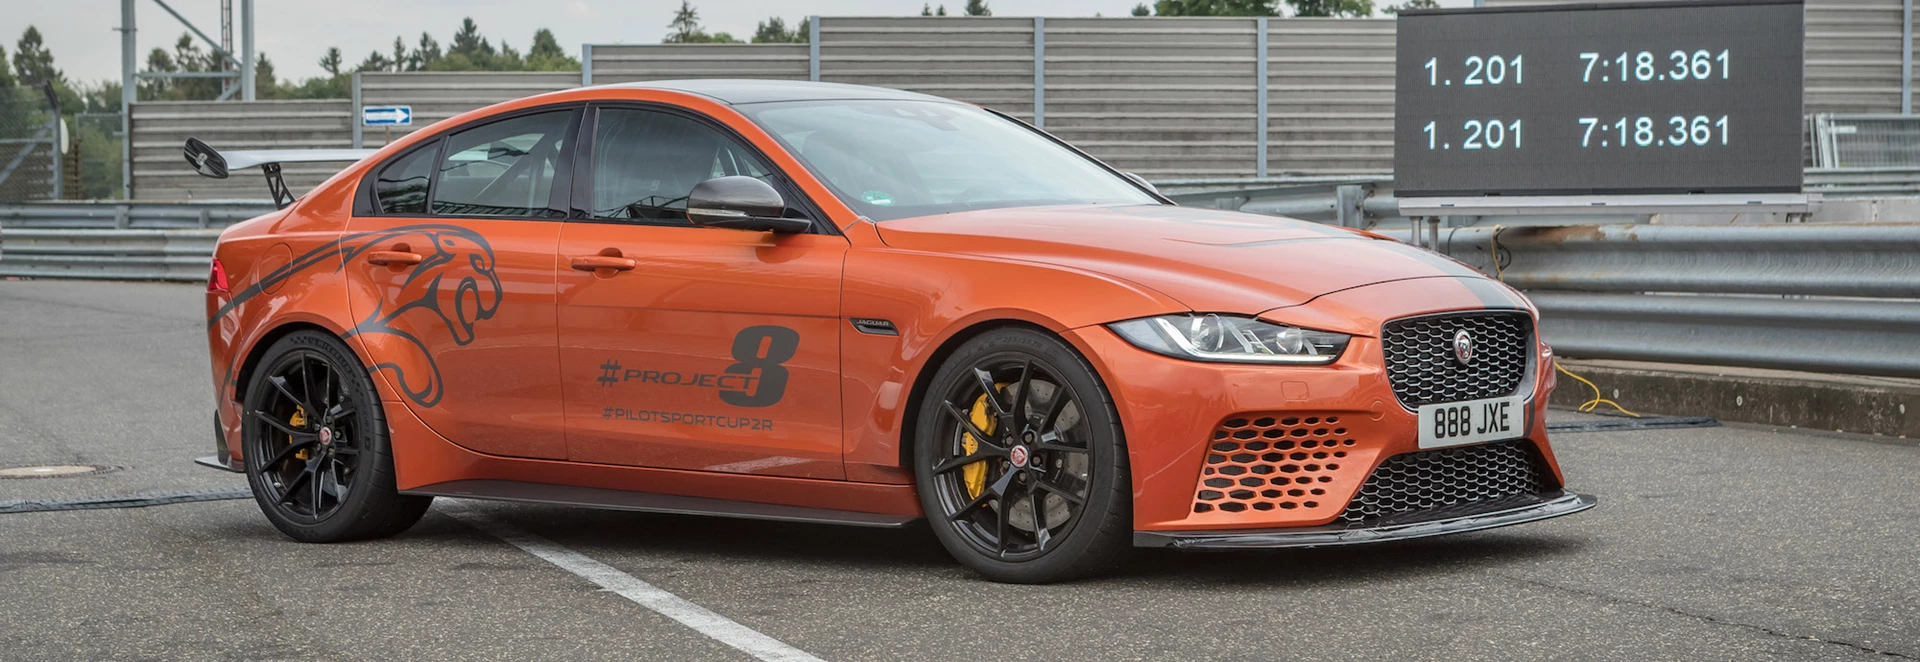 Jaguar breaks own Nürburgring record with XE SV Project 8